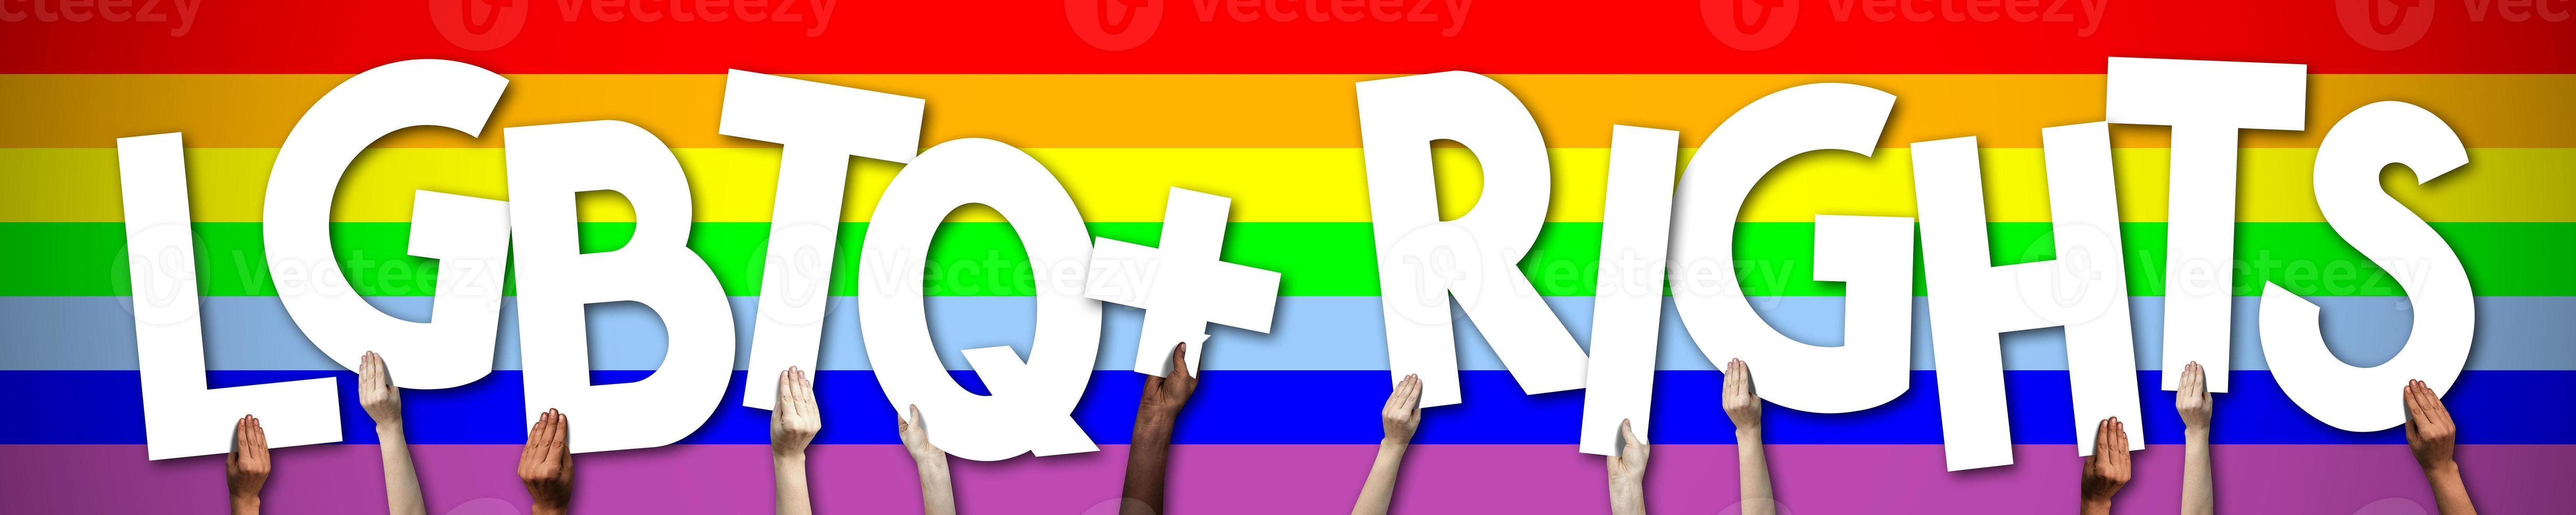 Lgbtq Rights Banner - Human Hands Holding Colorful Letters photo